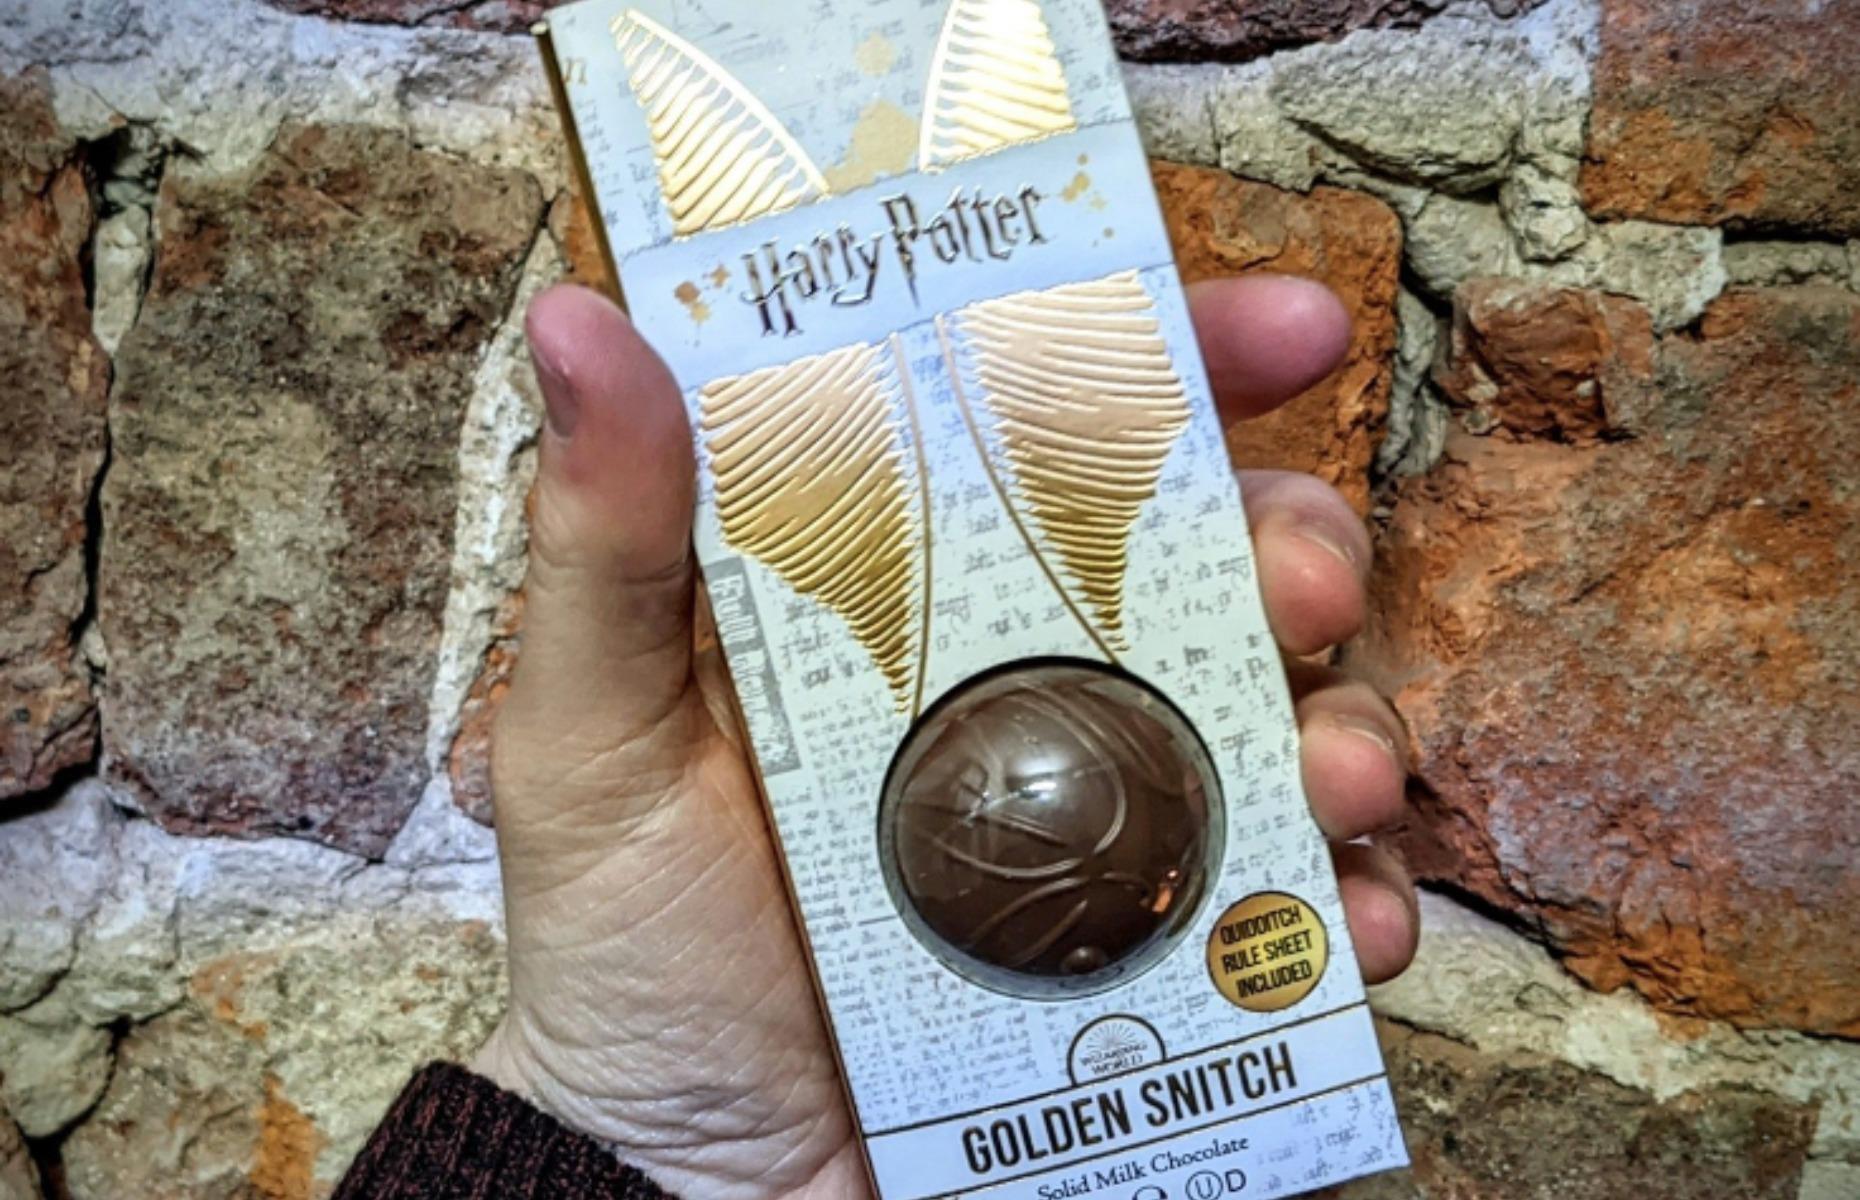 <p>Have you ever dreamt of catching your very own Golden Snitch? Well, now’s your chance. This magical gift shop in York sells a solid milk chocolate sphere molded to resemble the nifty gleaming ball. It comes with a Quidditch rules sheet too, making it a lovely keepsake for a Harry Potter fan.</p>